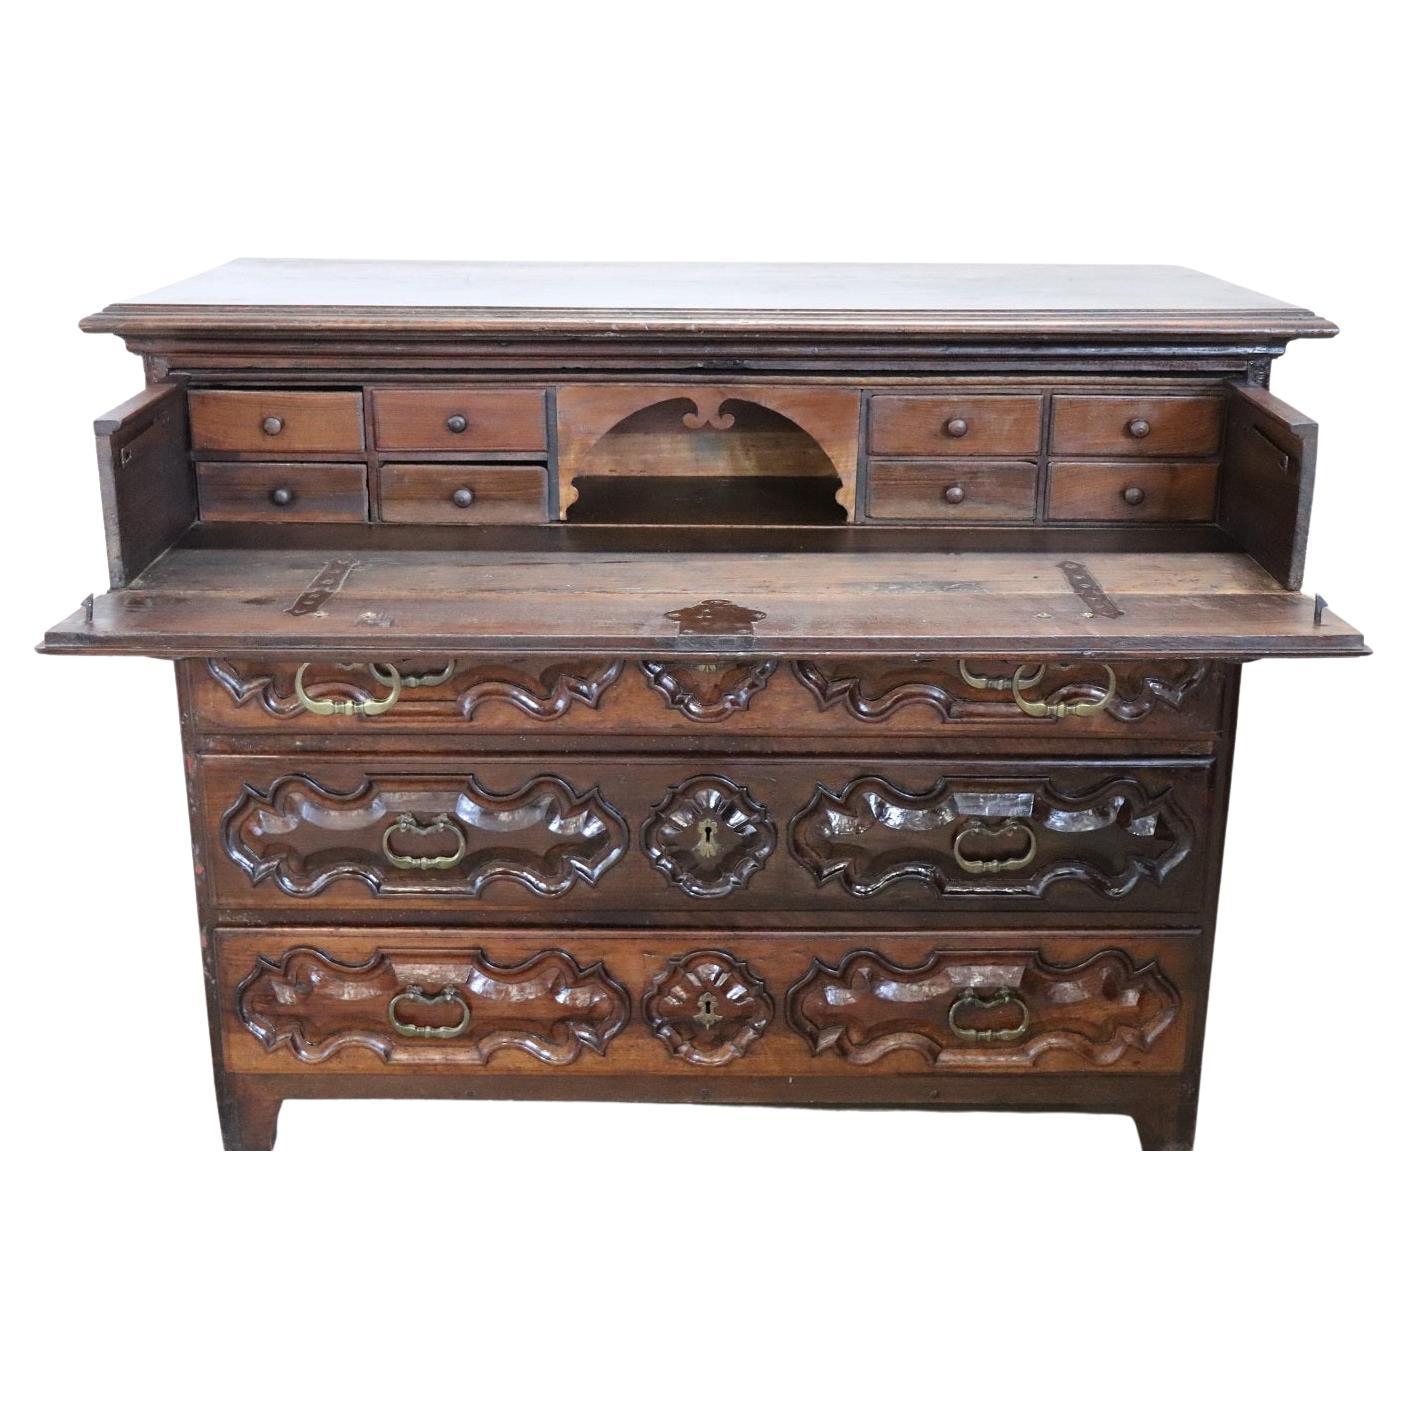 17th Century Italian Louis XIV Carved Walnut Antique Commode or Chest of Drawers For Sale